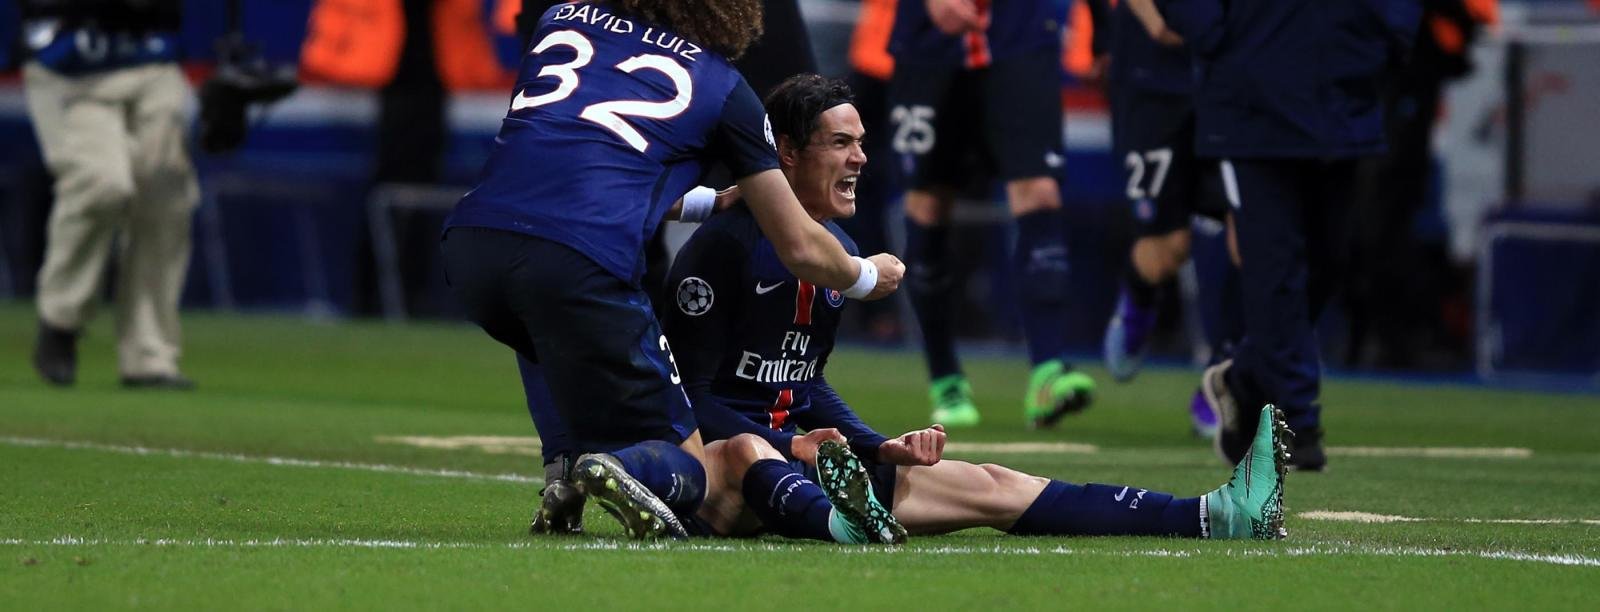 Champions League Round-Up: PSG beat Chelsea while Benfica see off Zenit